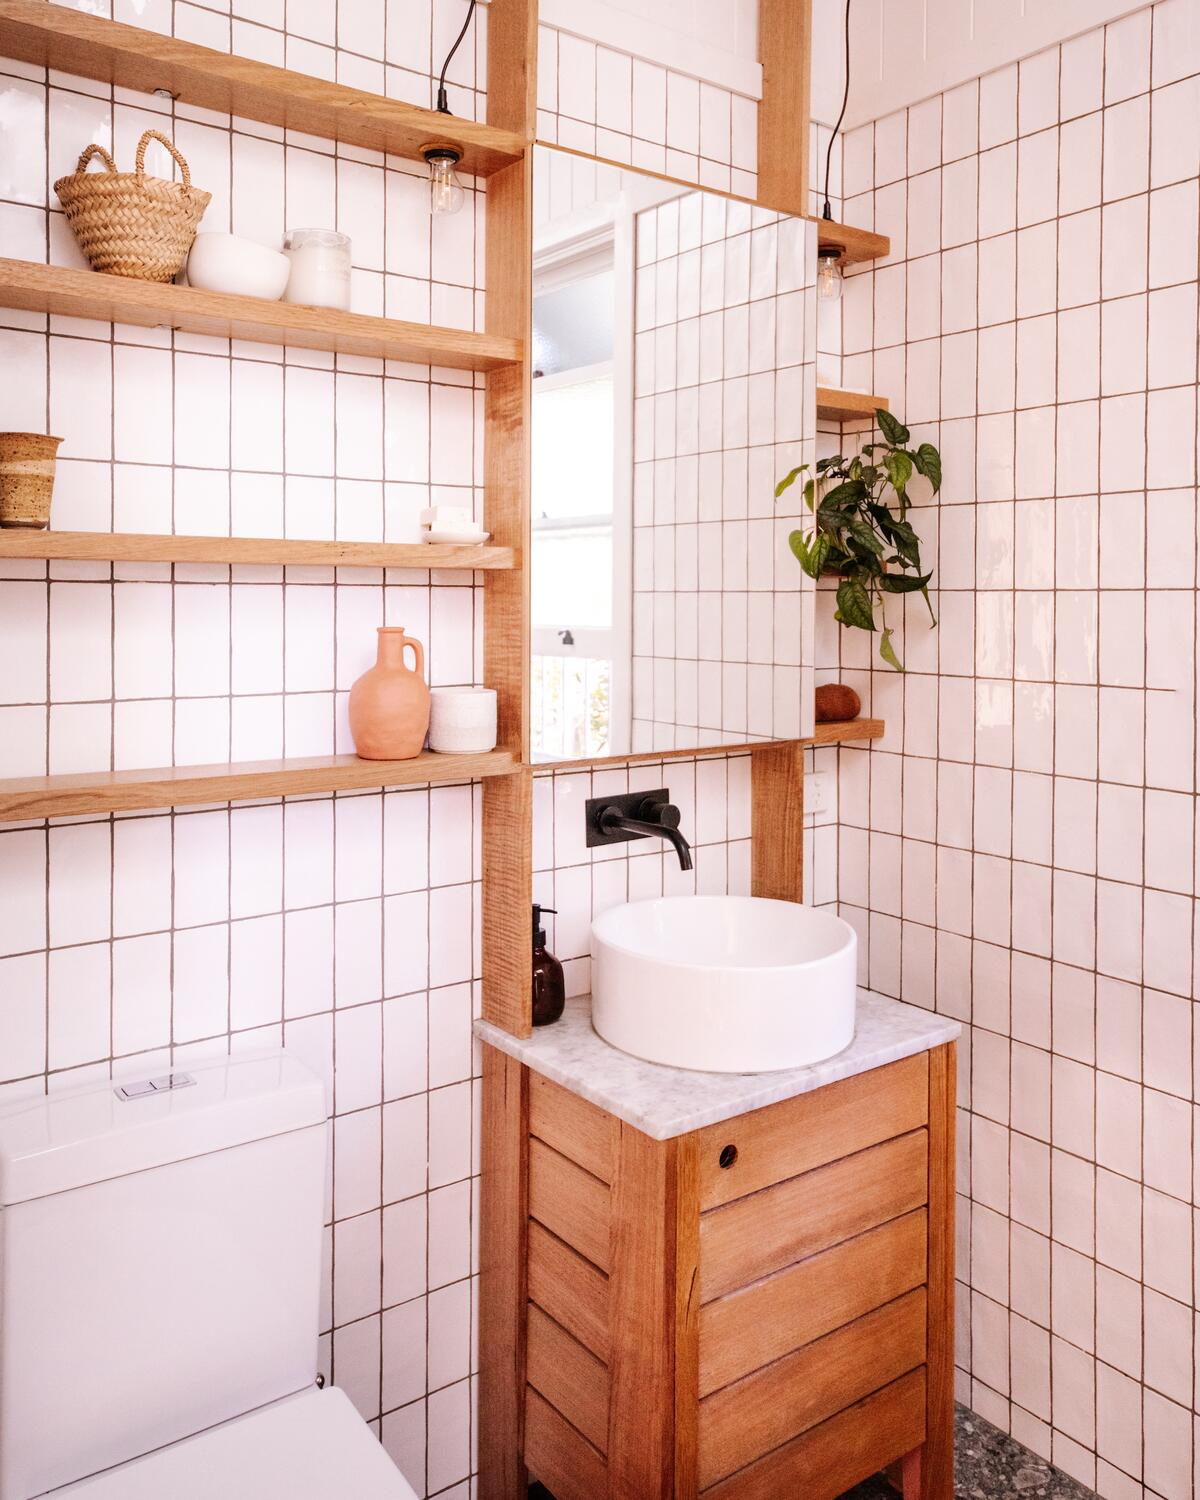 Vertical storage adds functionality to a petite bathroom 